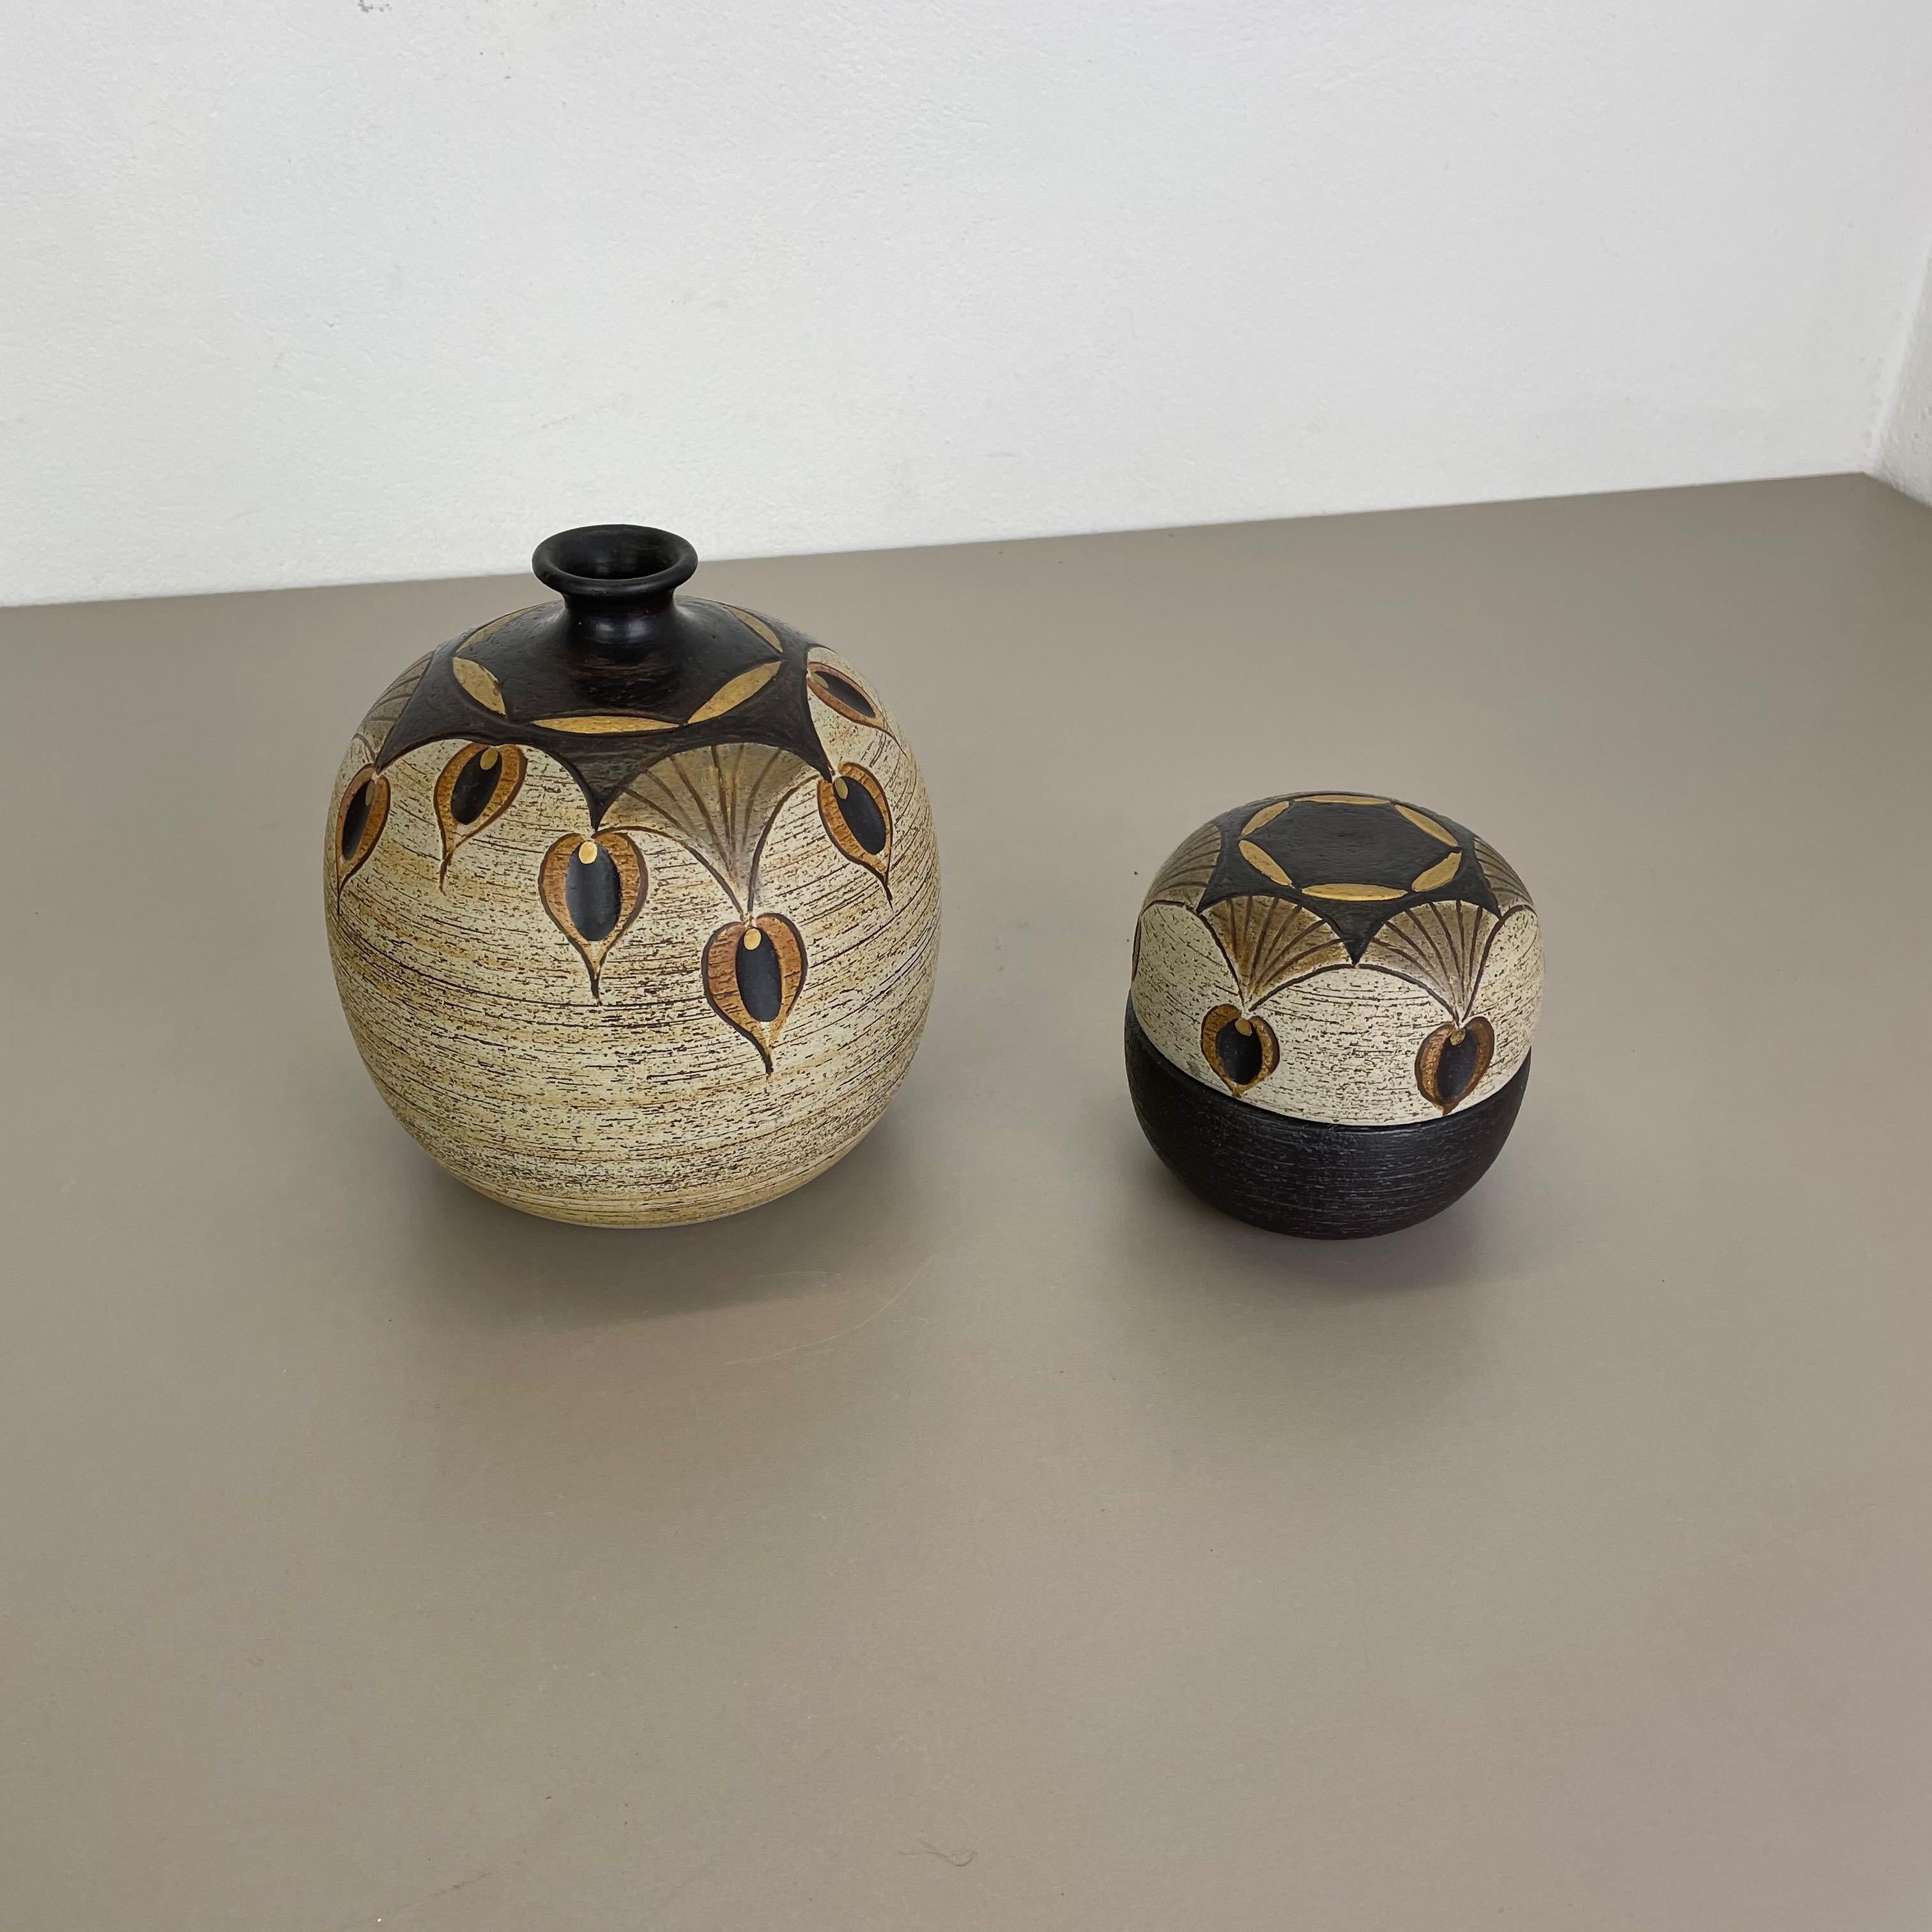 Article:

Set of 2 op art elements with abstract floral illustrations


Origin:

Germany


Produder:

Sgrafo Modern


Design:

Peter Müler


Material:

Pottery stoneware


Age:

1970s






Original 1970s set of 2